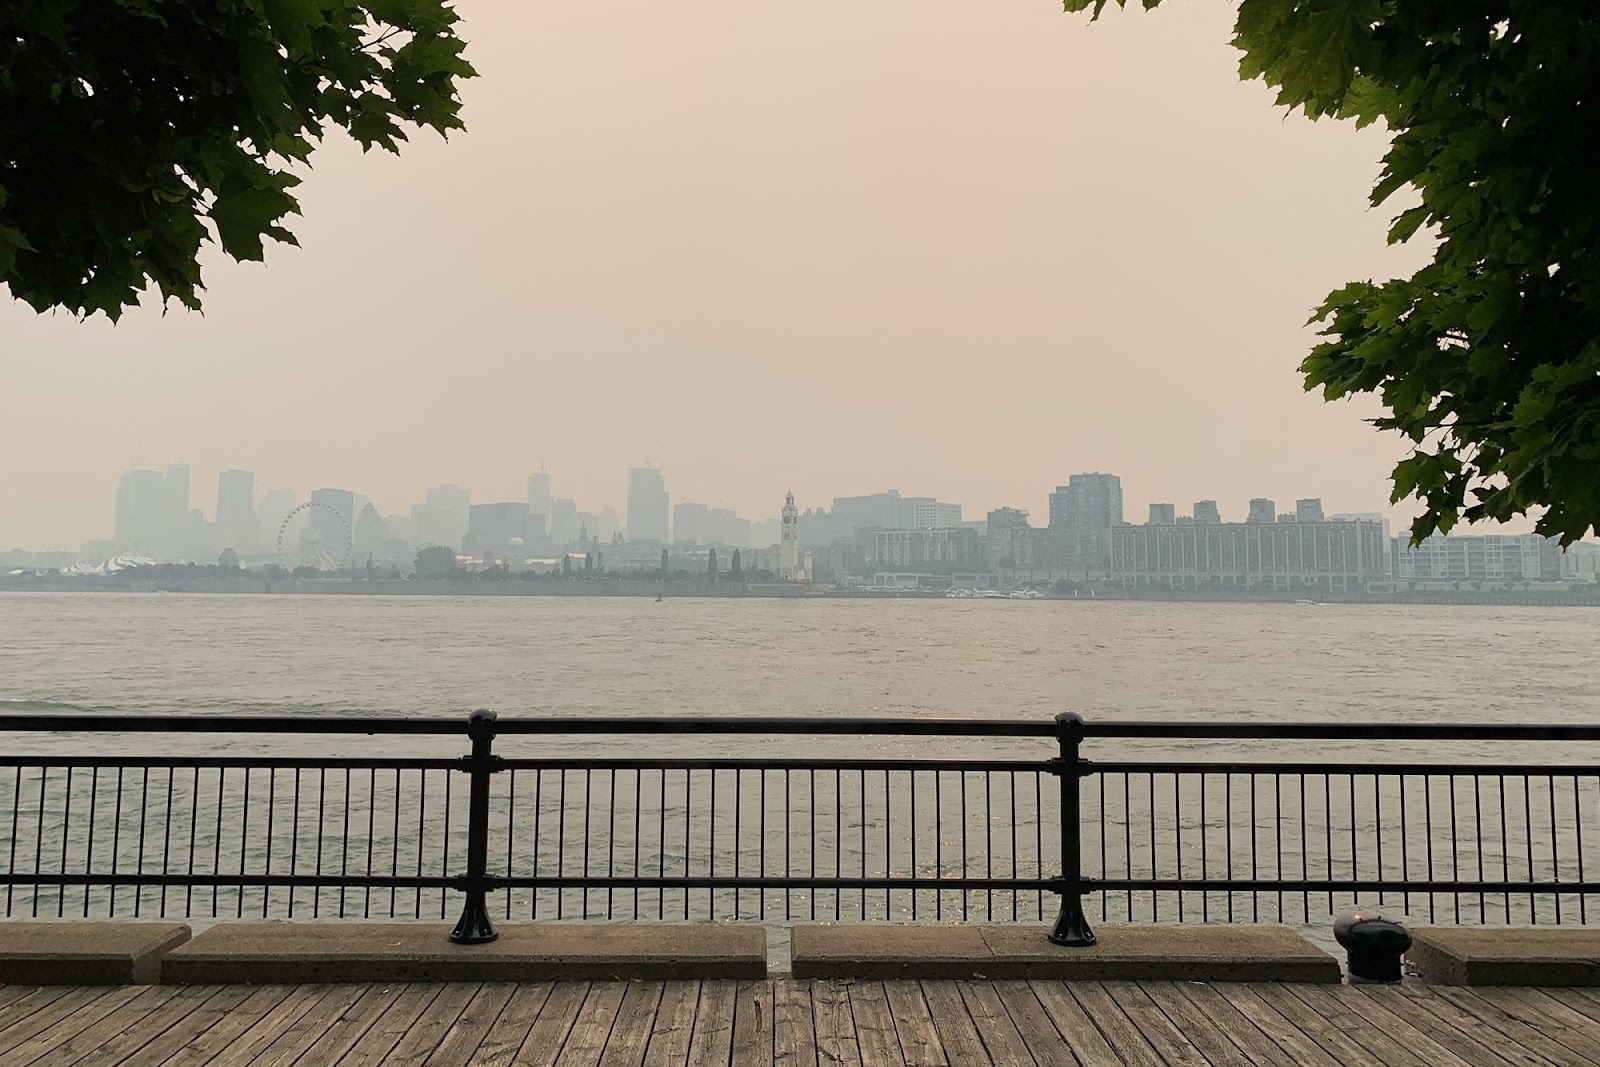 Montreal's skyline is pictured from Jean Drapeau Park with smoke caused by the wildfires, in Montreal, Quebec, on June 25, 2023. Montreal had the worst air quality in the world according to IQ Air. Environment Canada issued a Smog warning because of the smoke and discouraged exercise and spending too long outdoors. © ANNE-SOPHIE THILL/AFP via Getty Images